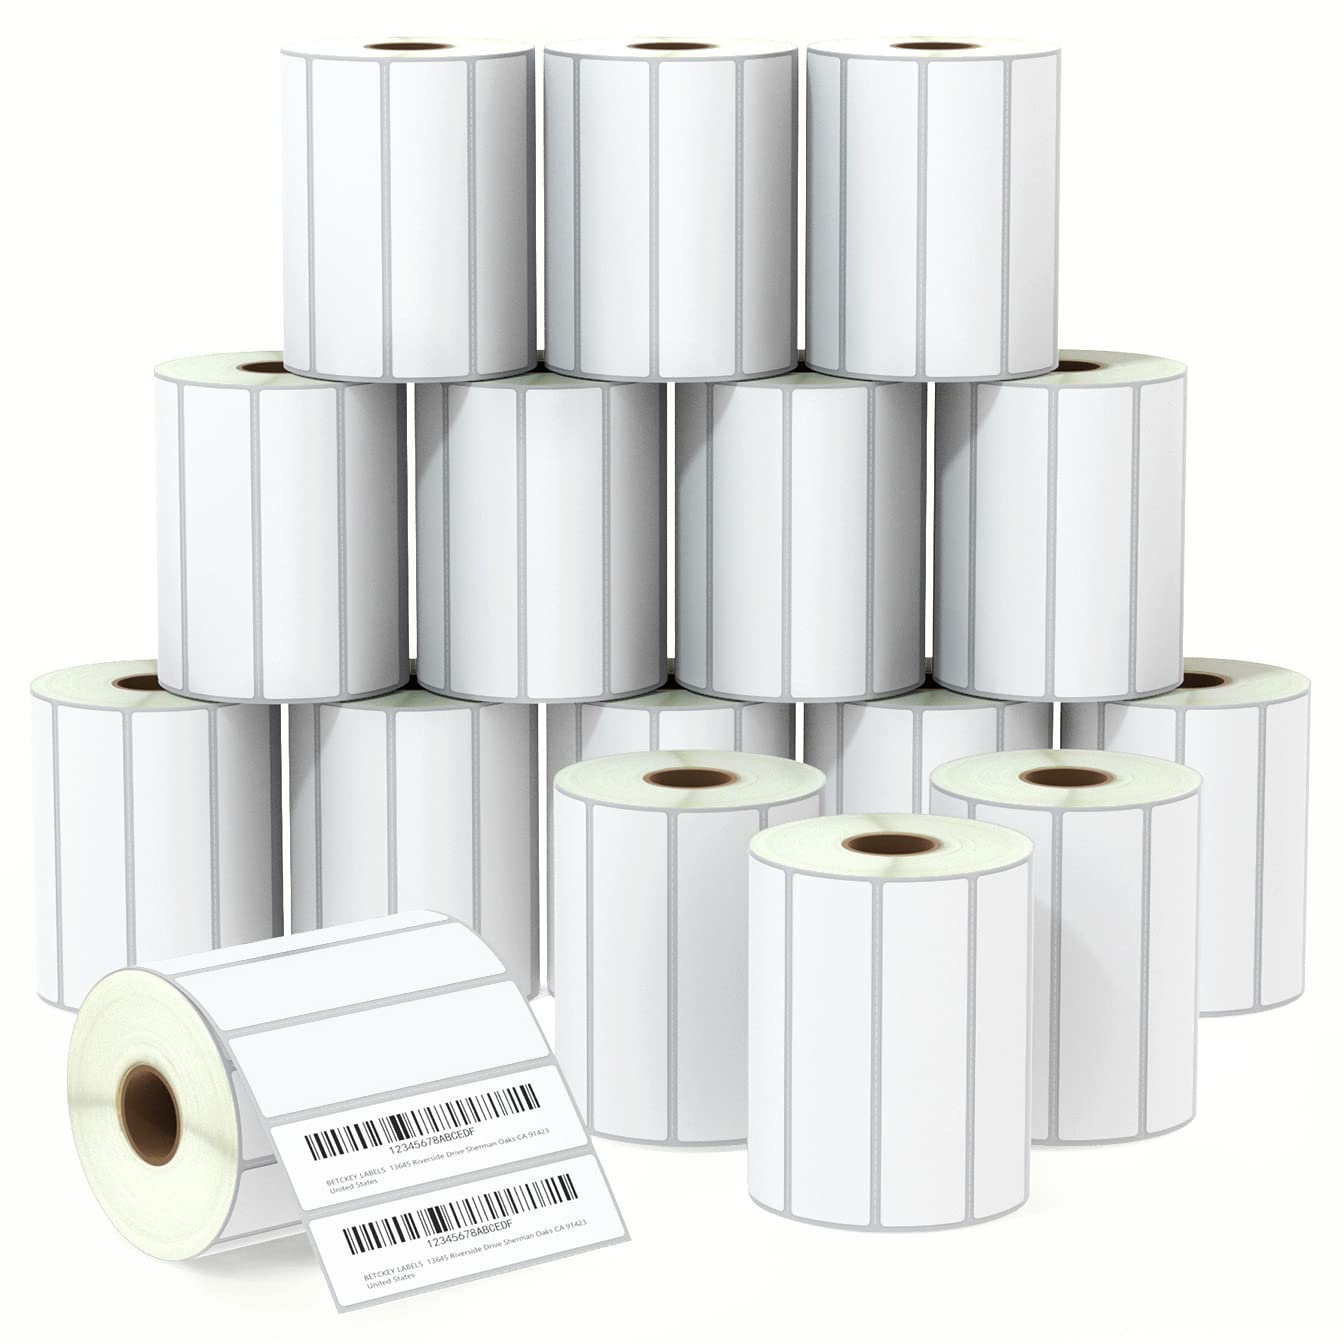 BETCKEY - 4" x 1" (102 mm x 25 mm) Multipurpose Labels Compatible with Zebra & Rollo Label Printer,Premium Adhesive & Perforated [2 Rolls, 2750 Labels]